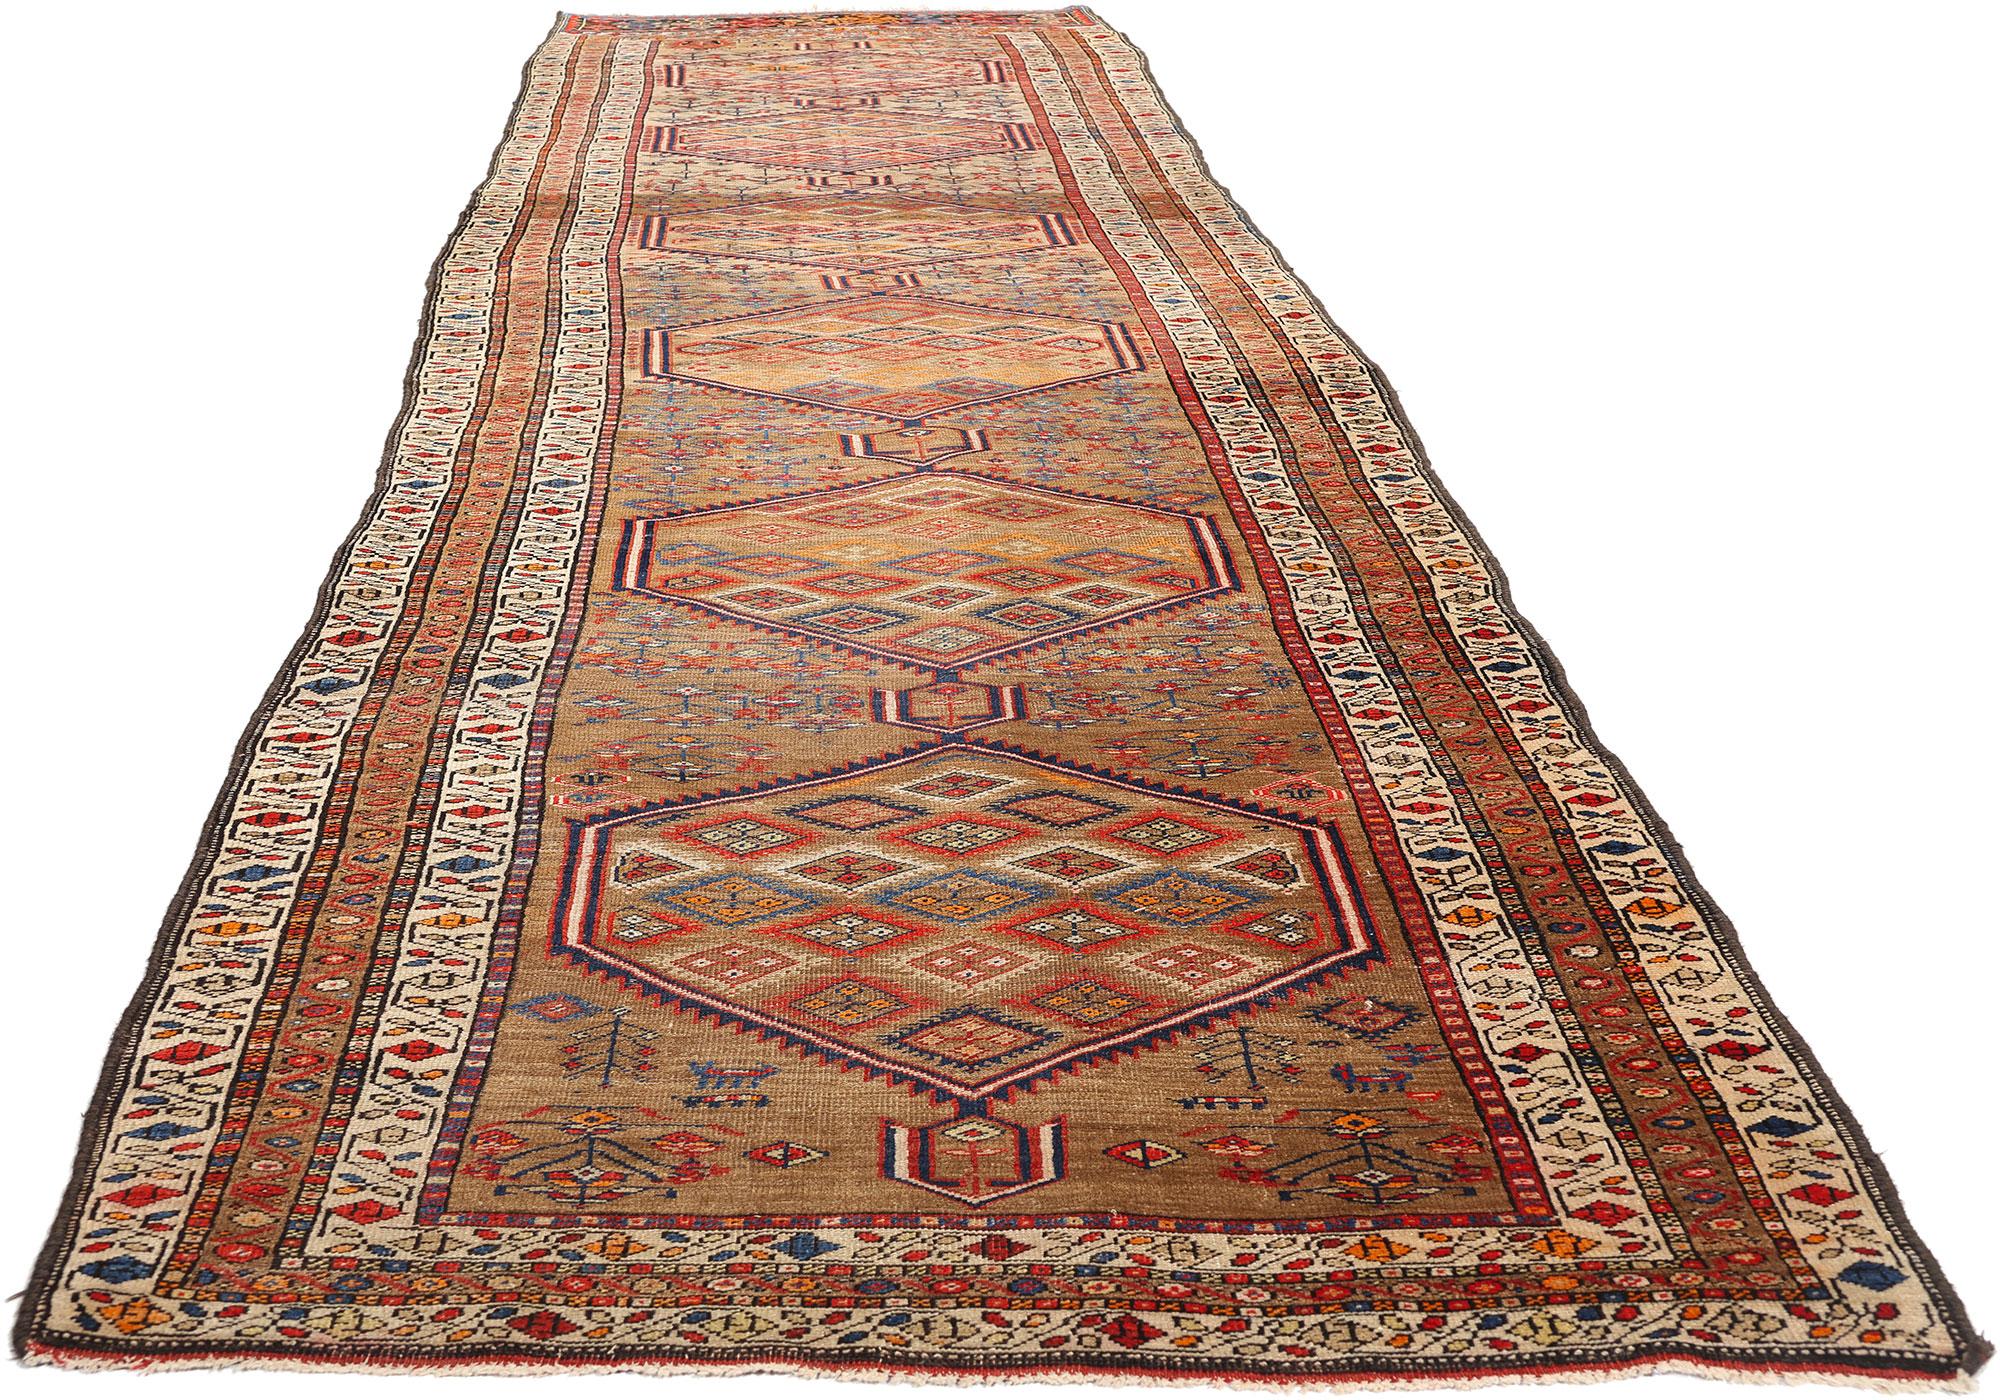 Malayer Antique Persian Sarab Rug Carpet, 04'01 x 15'01 For Sale